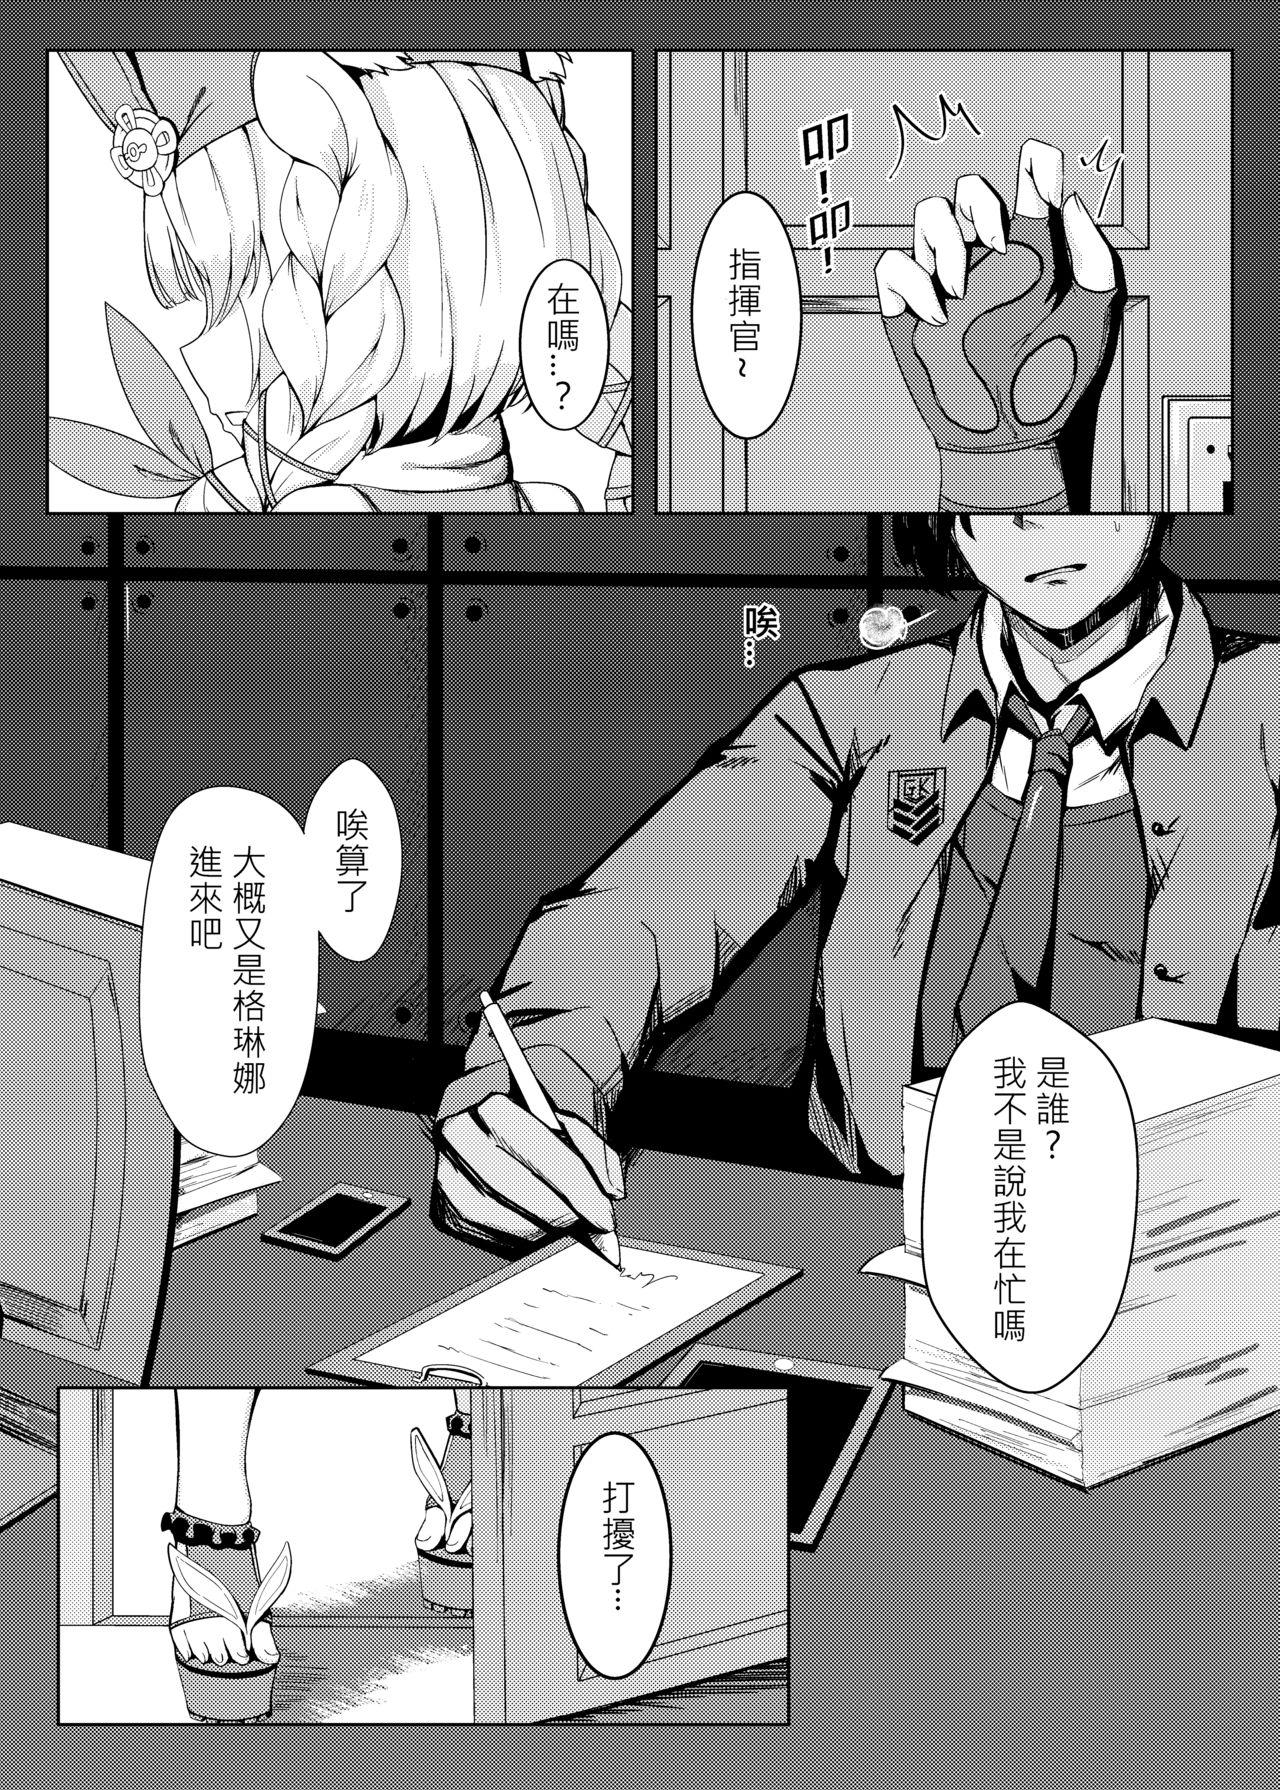 Crazy Rest with SR-3MP - Girls frontline Solo - Page 3